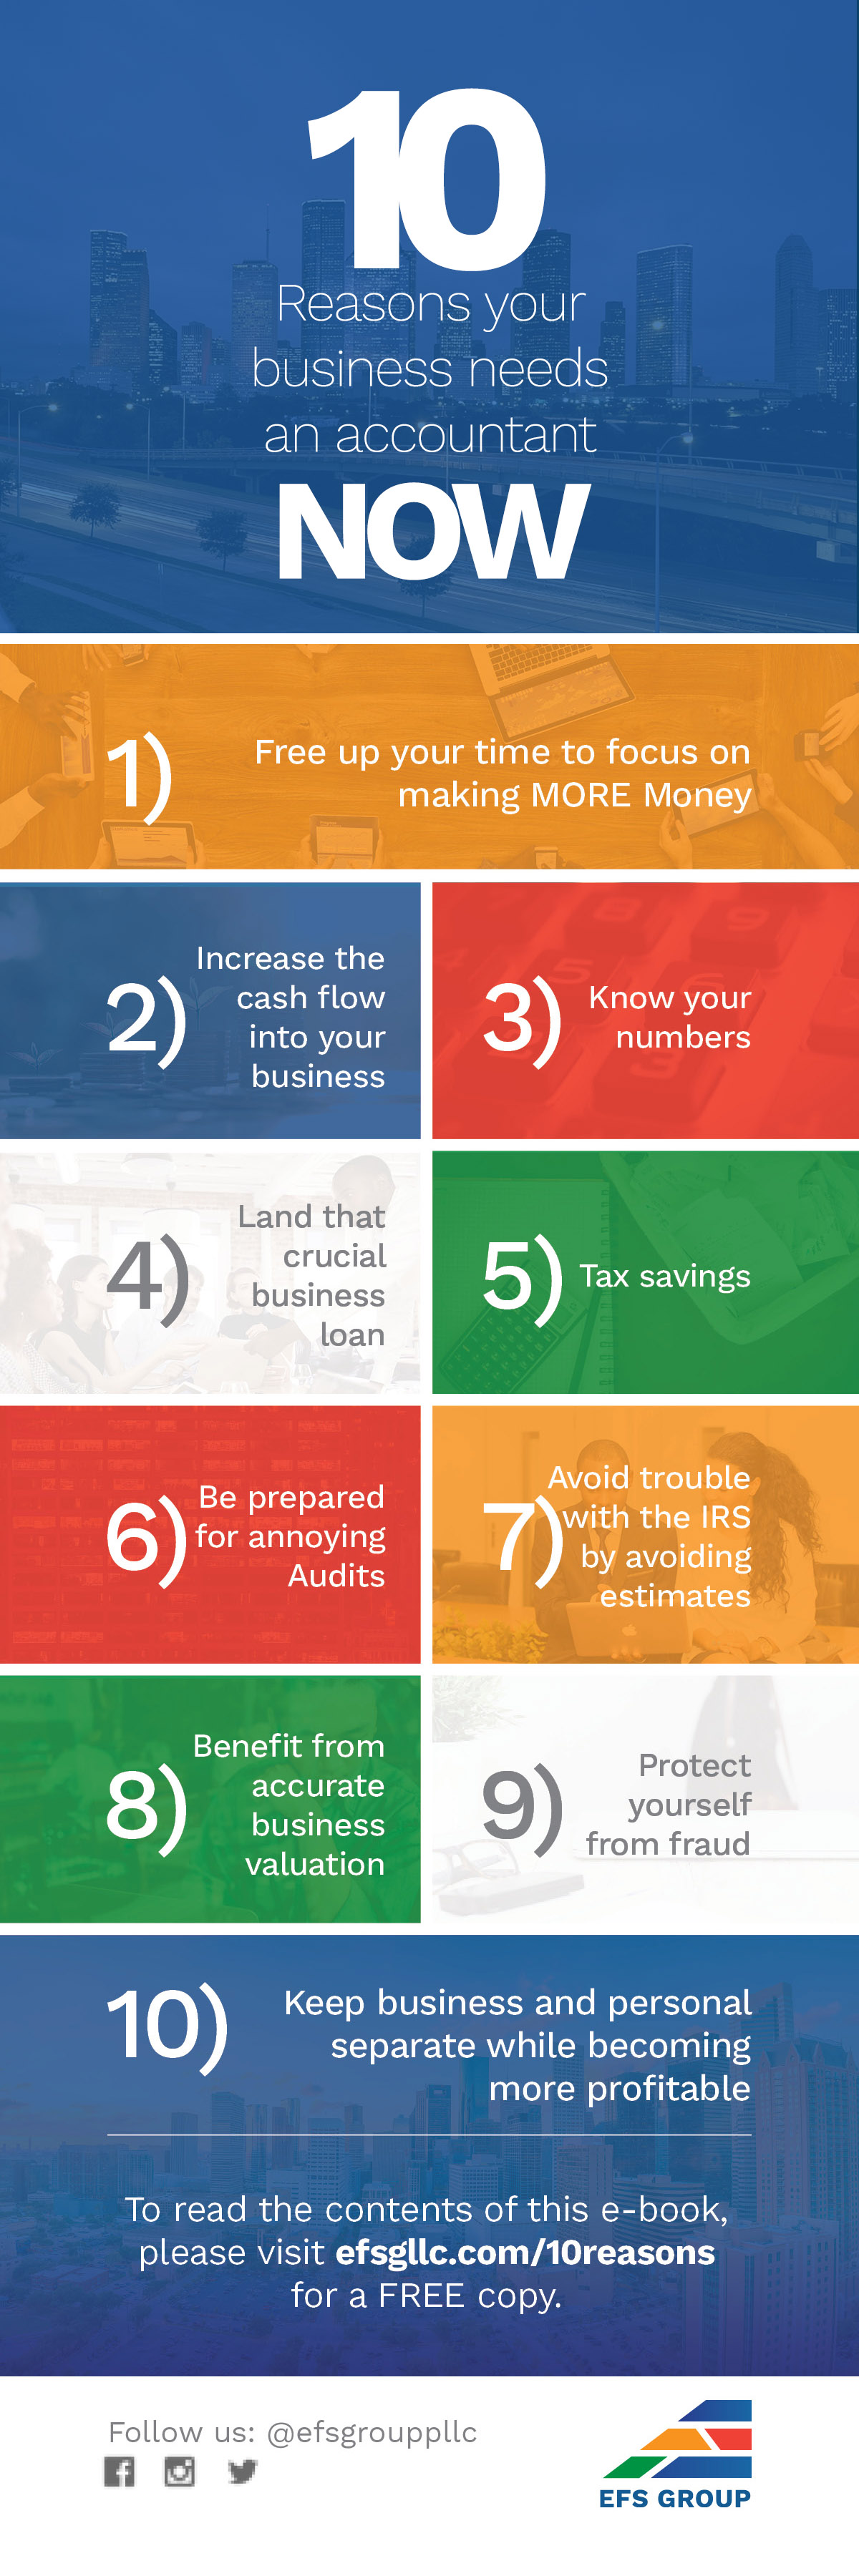 Infographic: 10 Reasons your business needs an accountant now